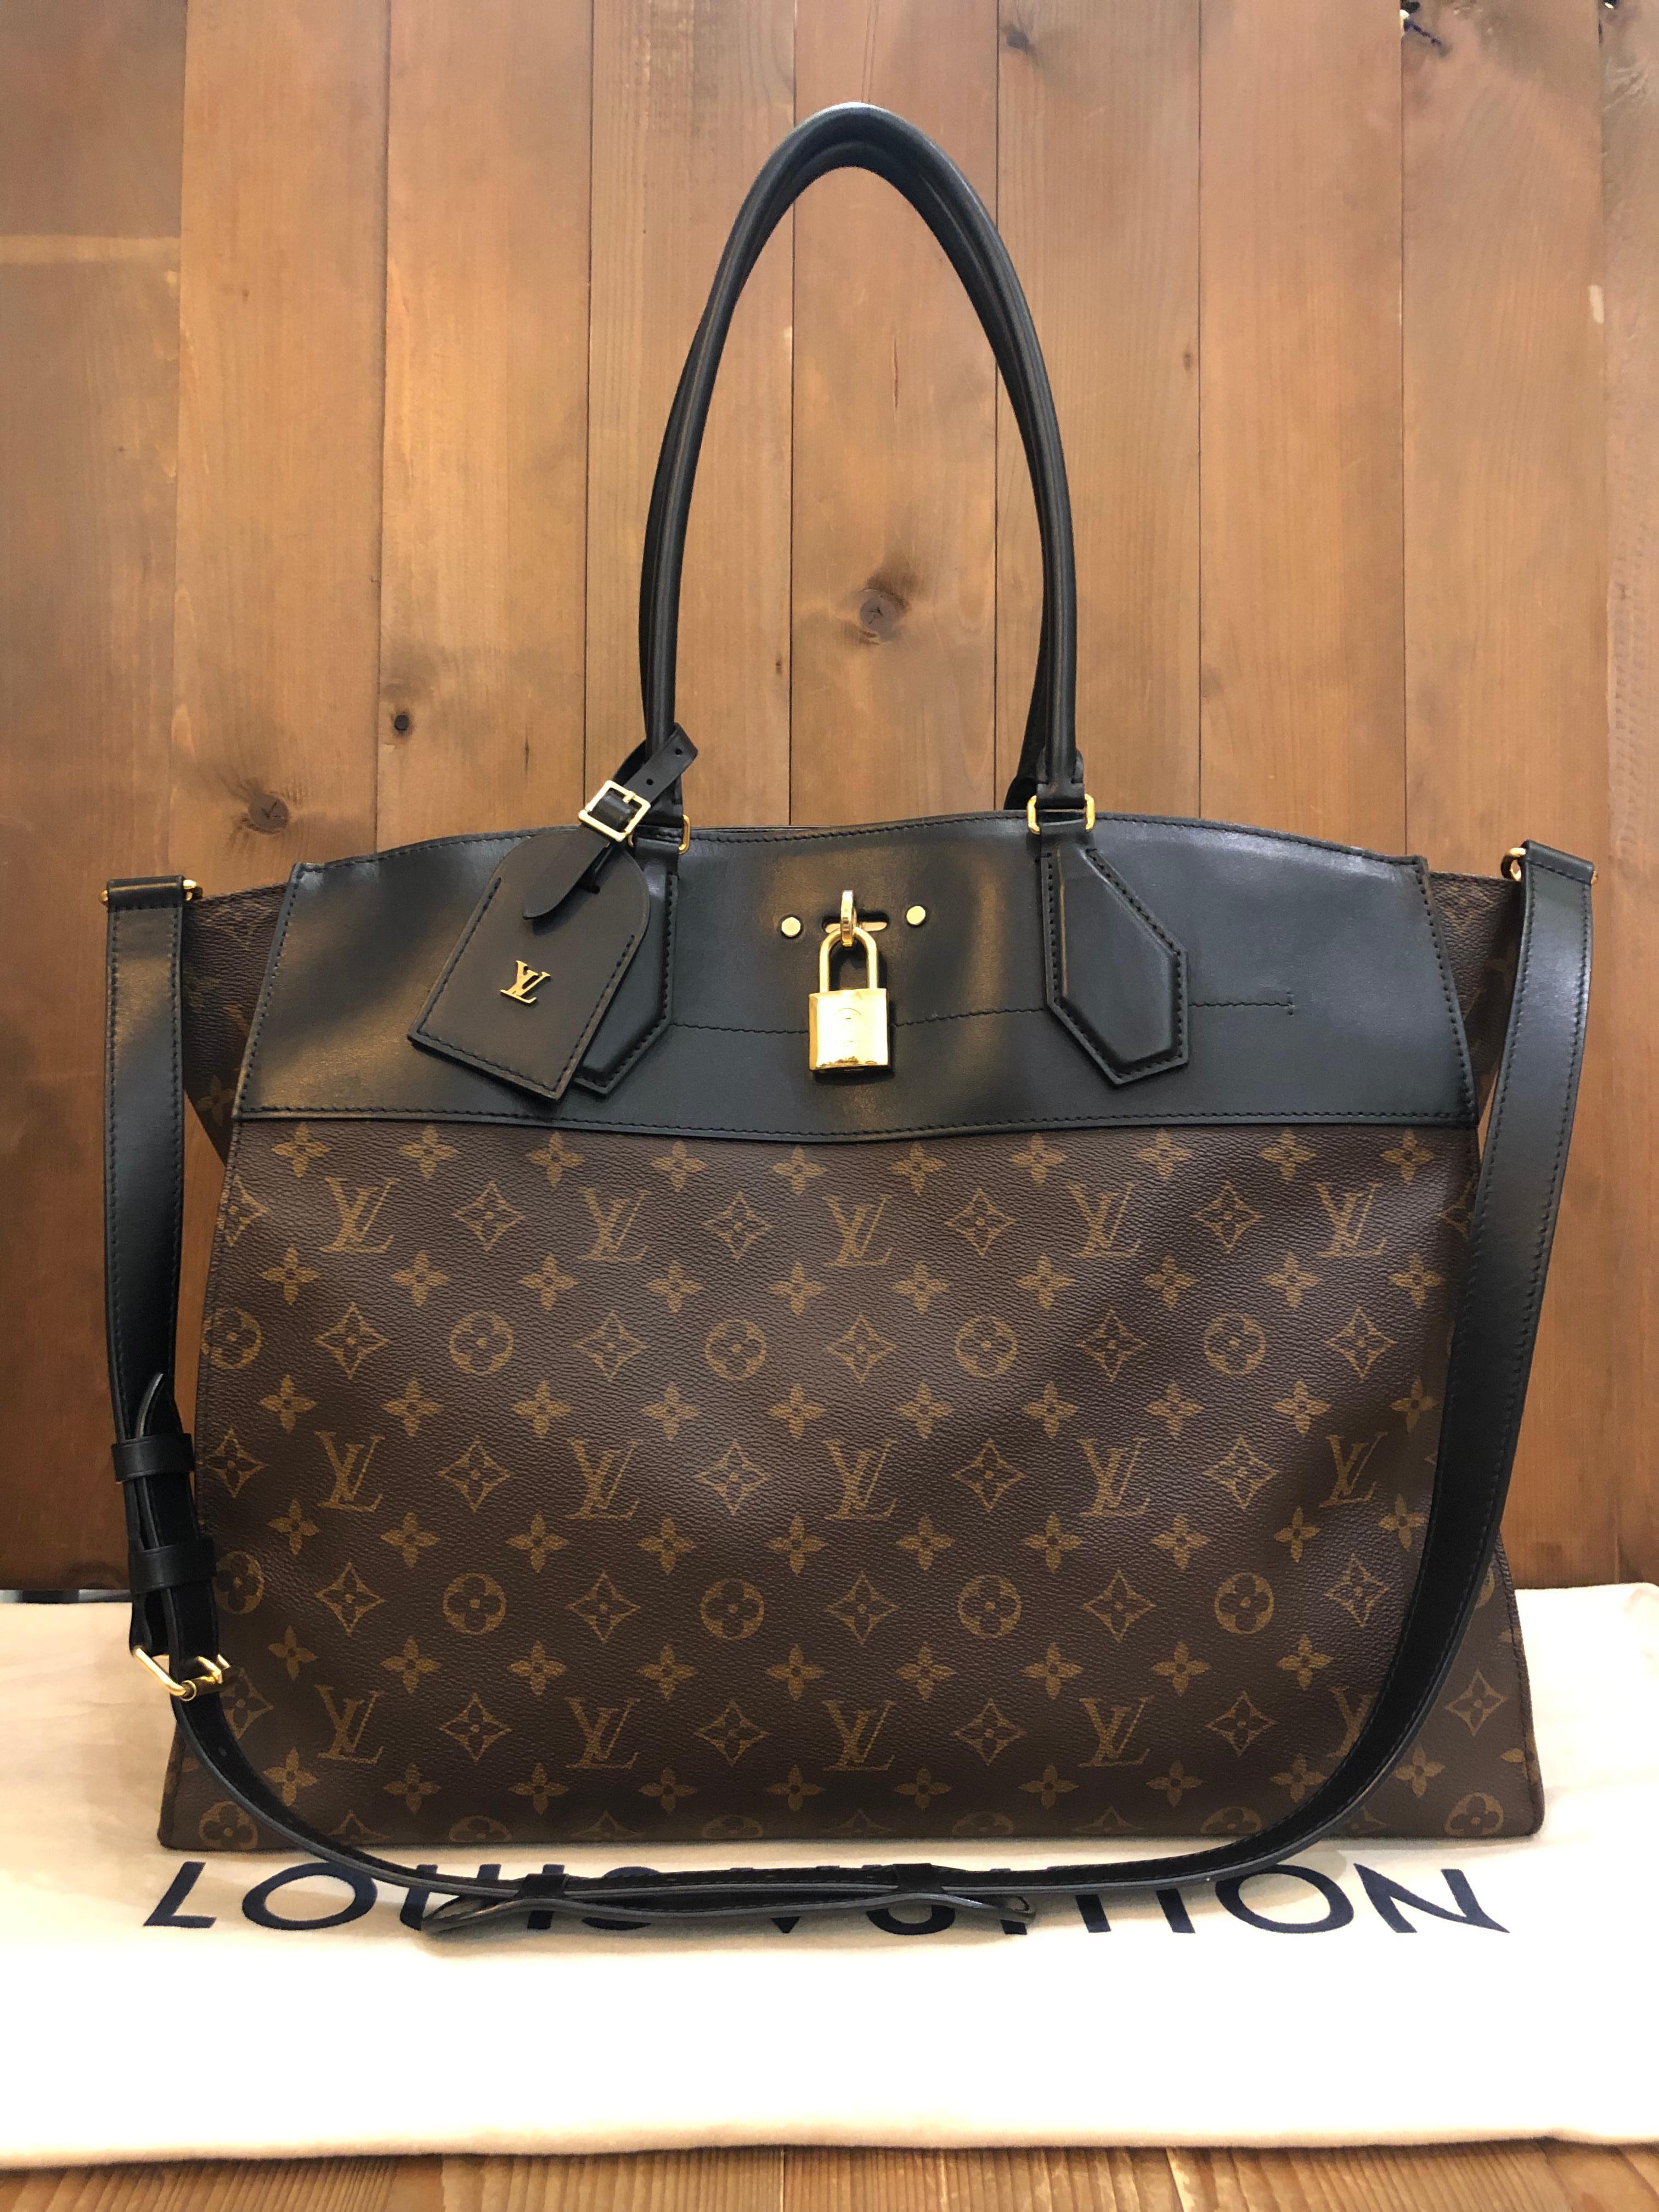 This chic and stylish LOUIS VUITTON XXL tote is crafted of Louis Vuitton��’s signature monogram coated canvas trimmed with smooth black leather featuring rolled black leather handles and polished gold toned hardware. This tote comes with a detachable